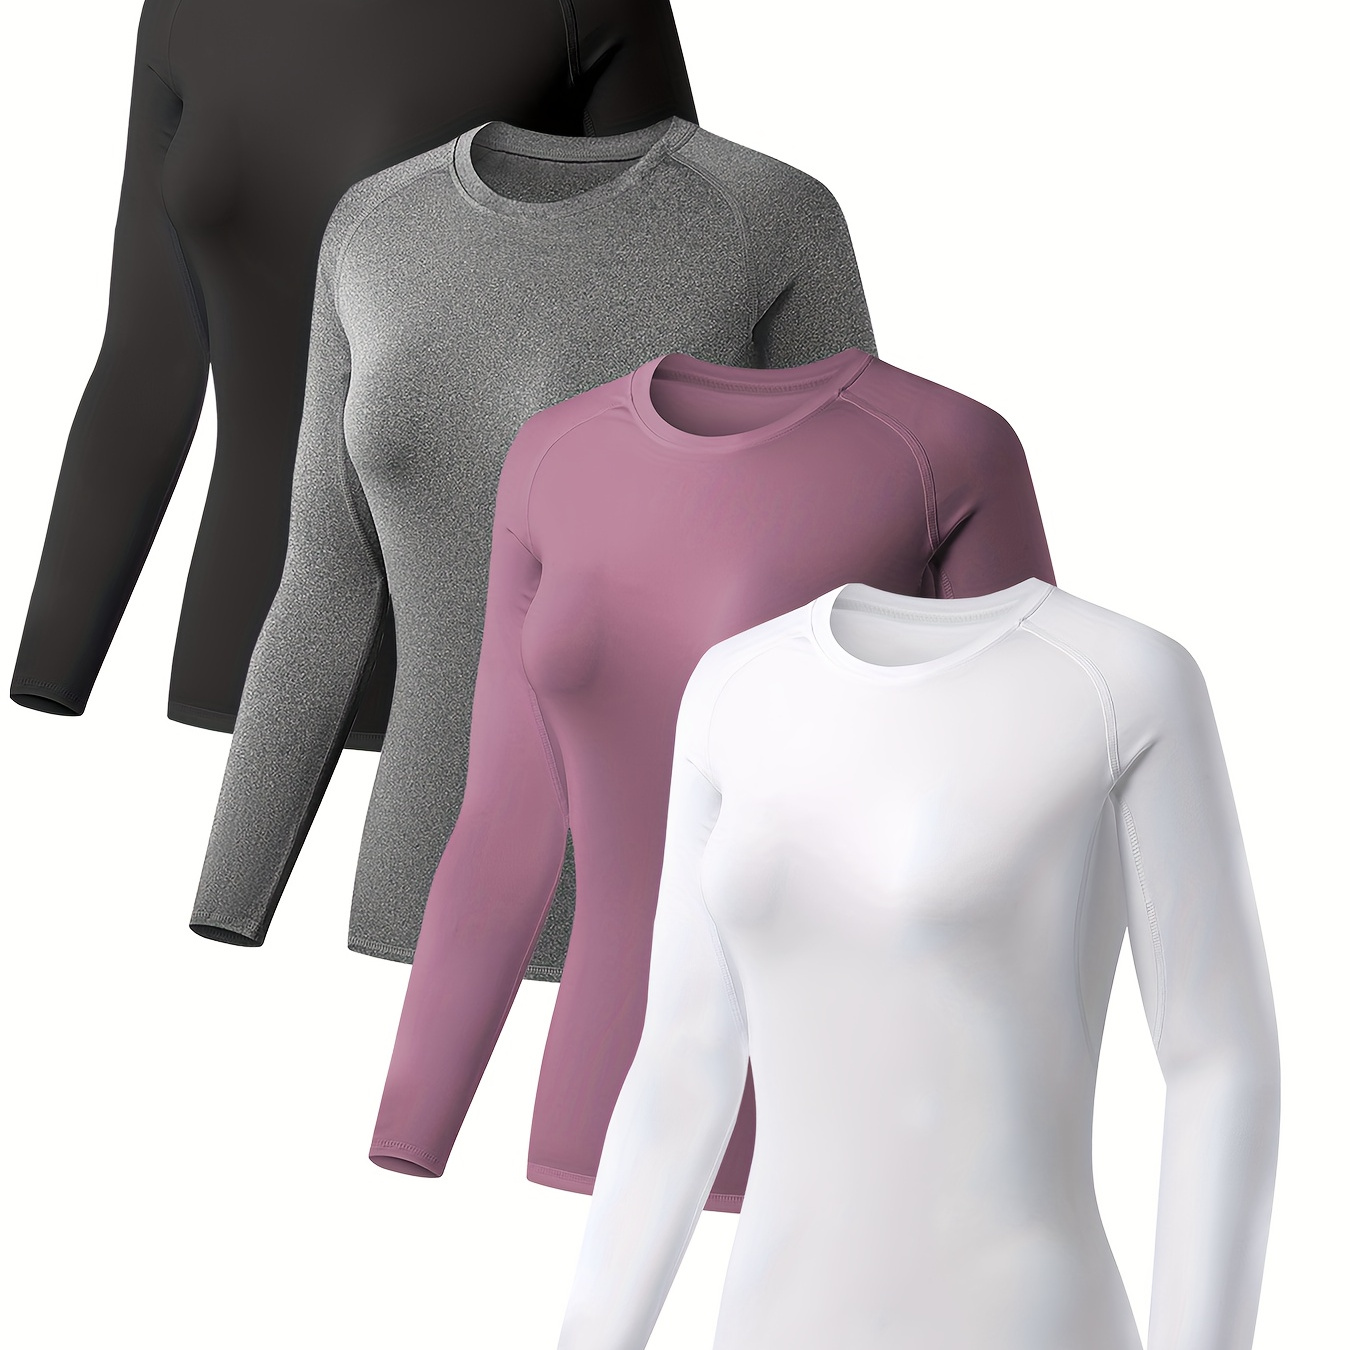 

4pcs Women's Compression T-shirt, Long Sleeve Solid Color Workout Baselayer Athletic Top, Women's Activewear